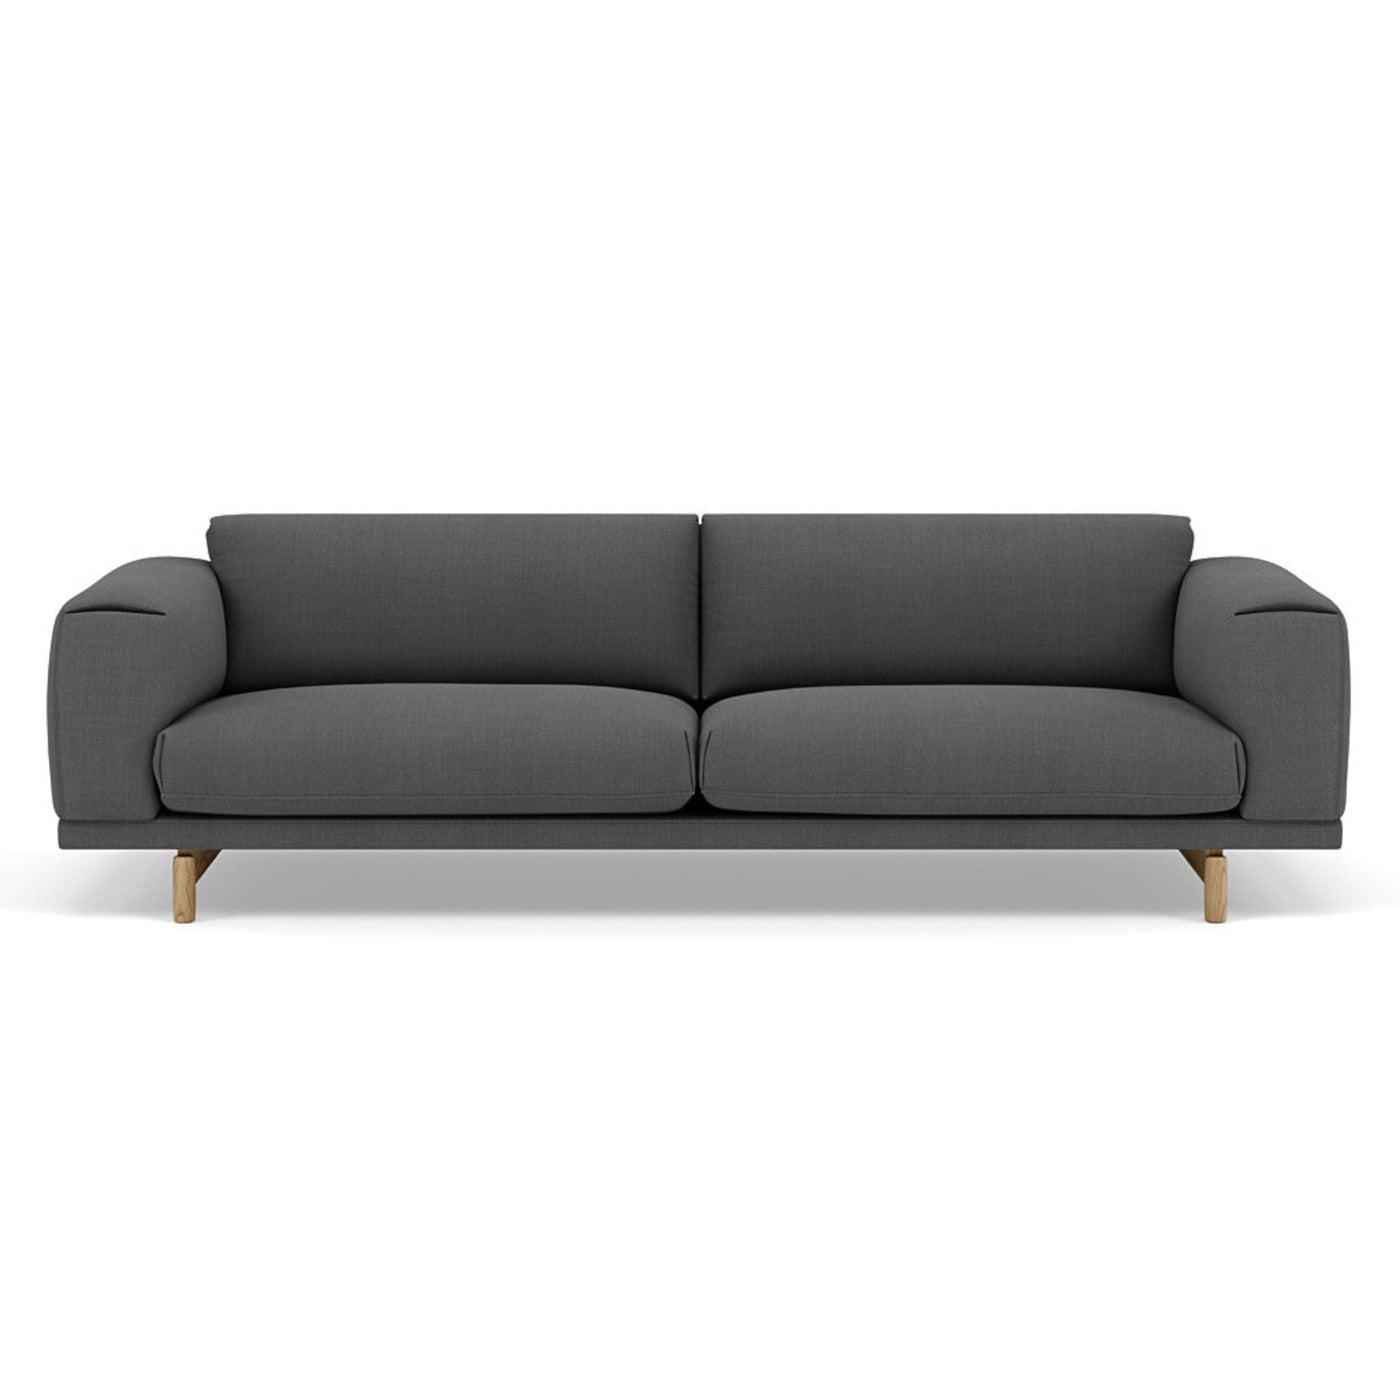 Muuto Rest Sofa 3 Seater in Remix 163 grey. Made to order from someday designs. #colour_remix-163